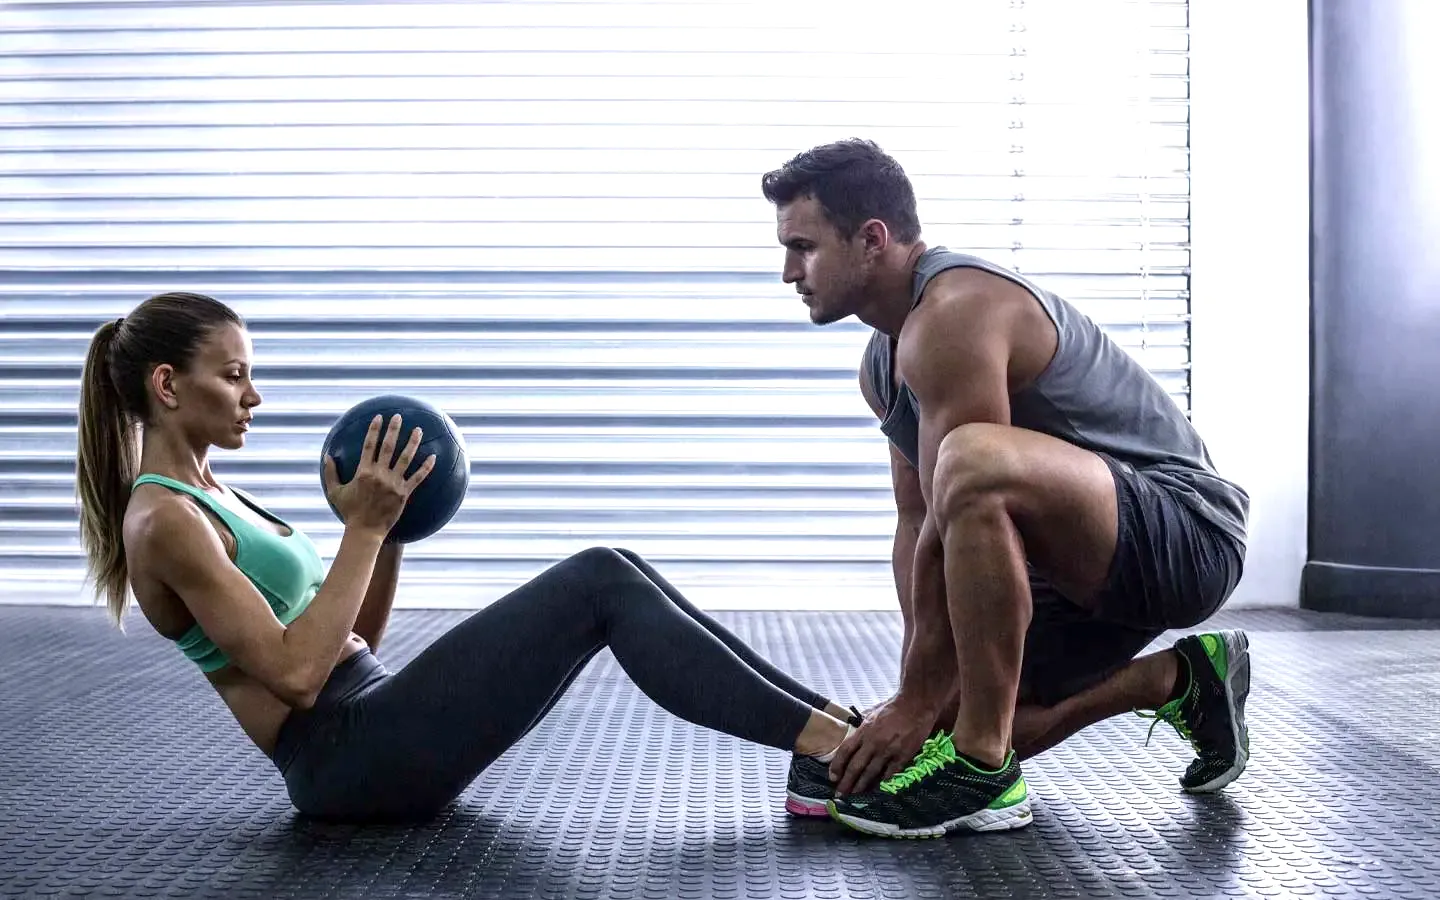 Why Choose a Level 4 Personal Trainer Course in Dublin